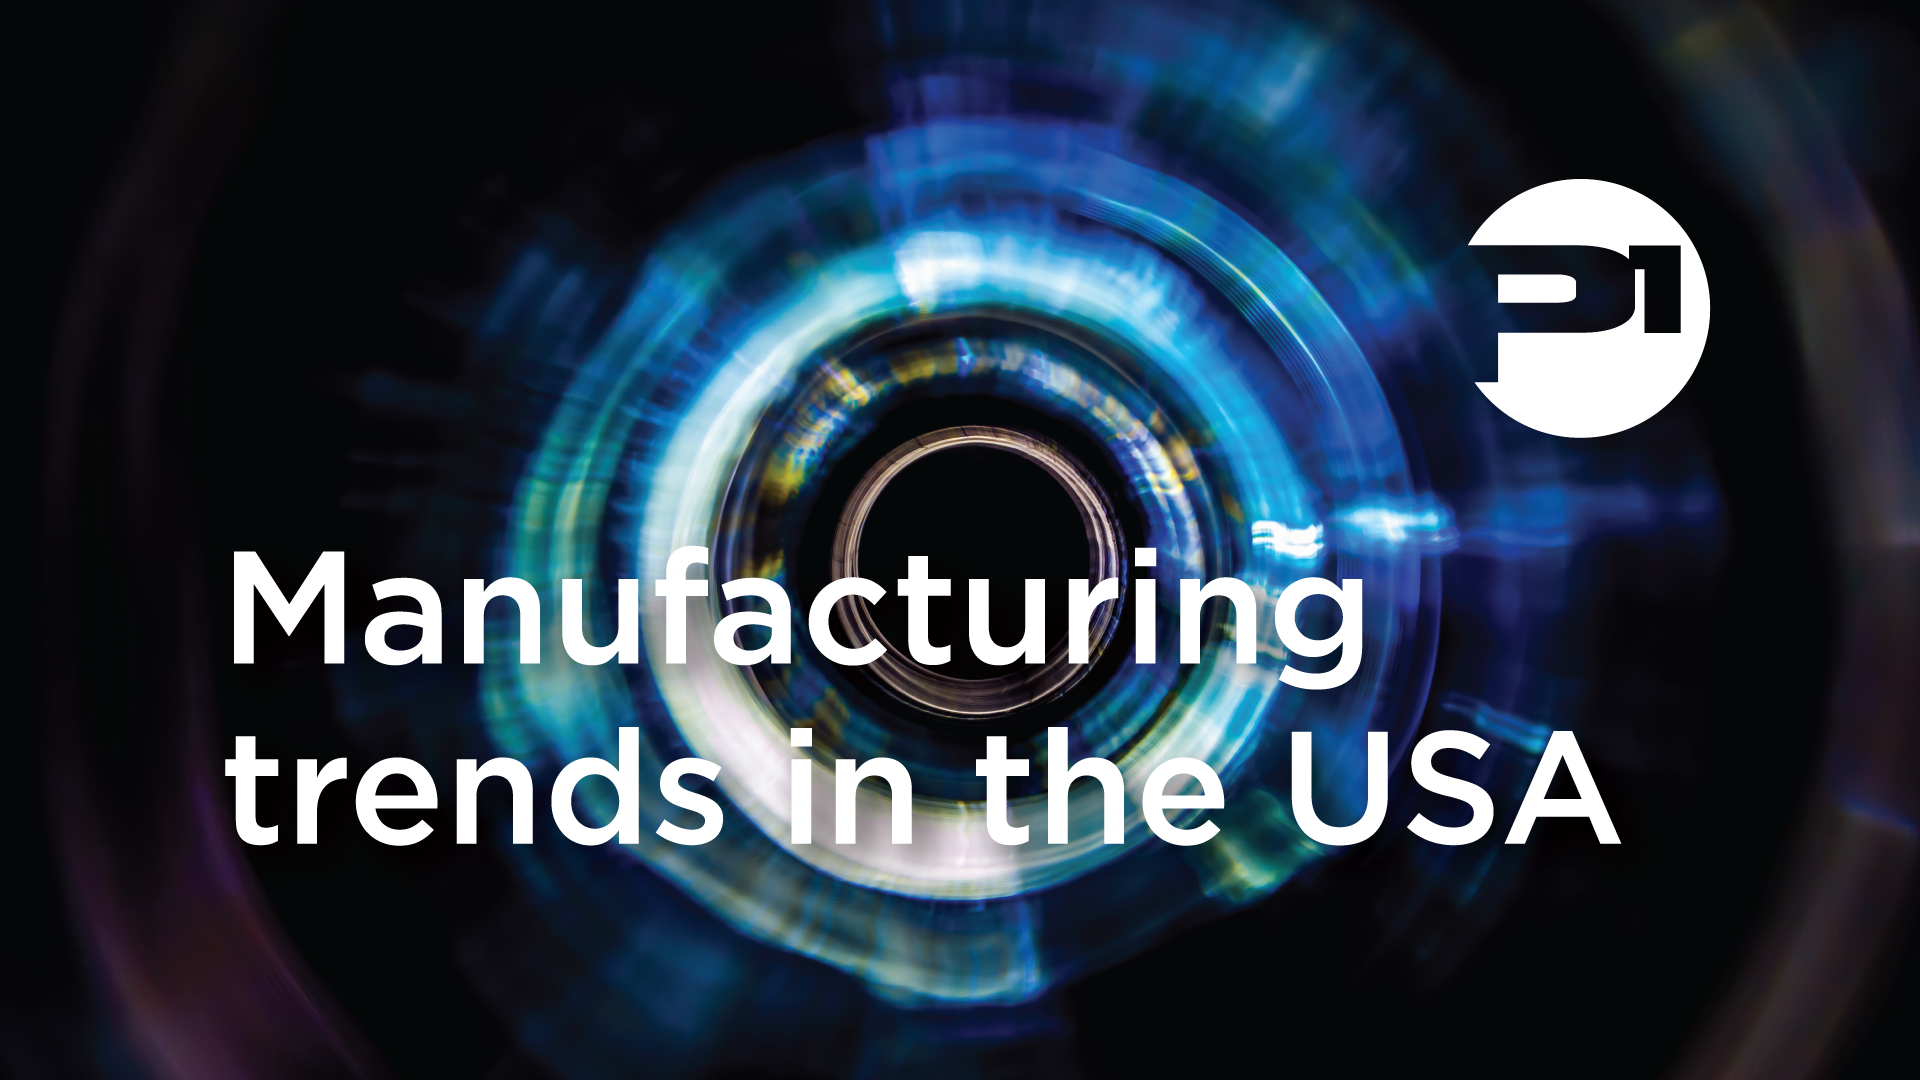 P1 Industries : Manufacturing trends in the USA